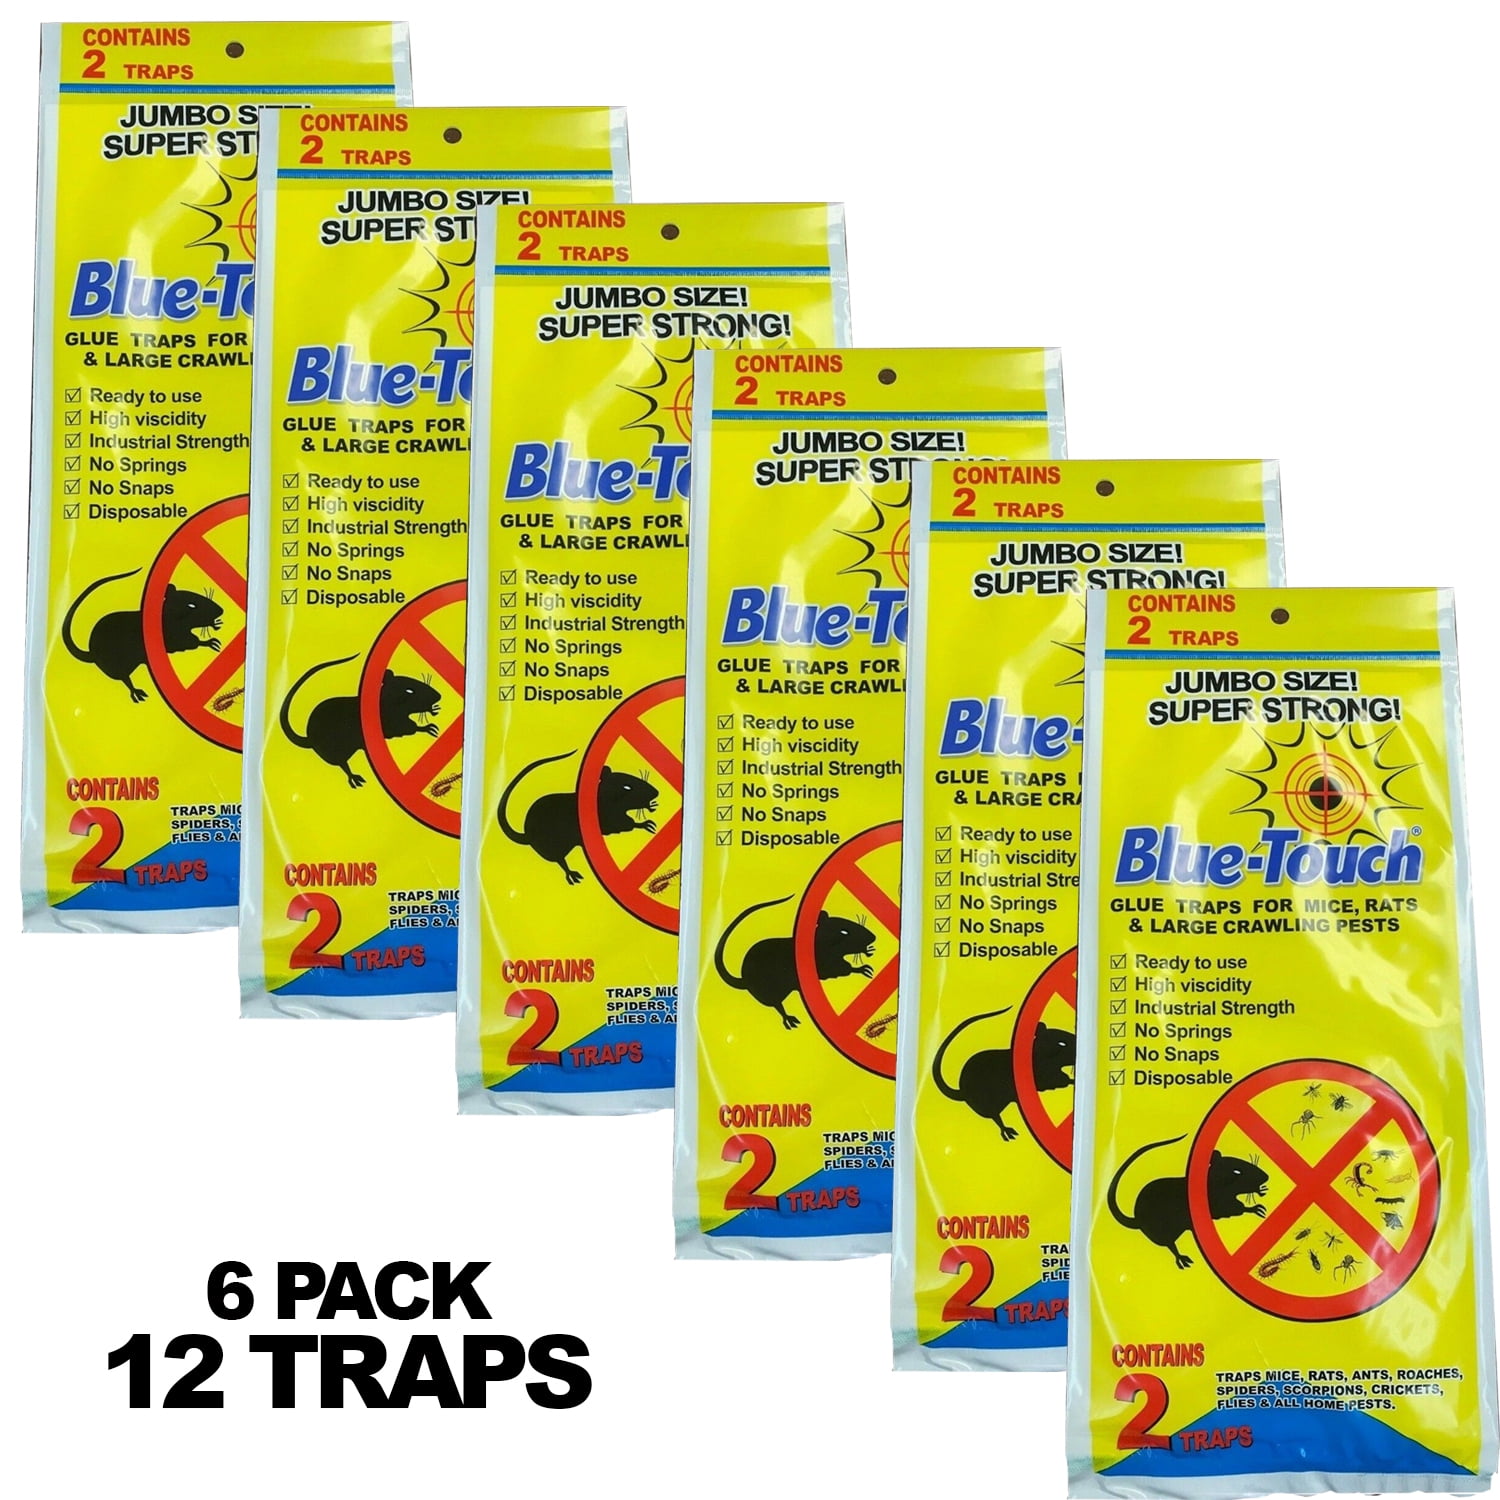 Kensizer 12-Pack Mouse Rat Glue Trap, Super Sticky Adhesive Glue Board  Traps for Mice Rats Catches Indoor&Outdoor, Trampas para Ratones, Extra